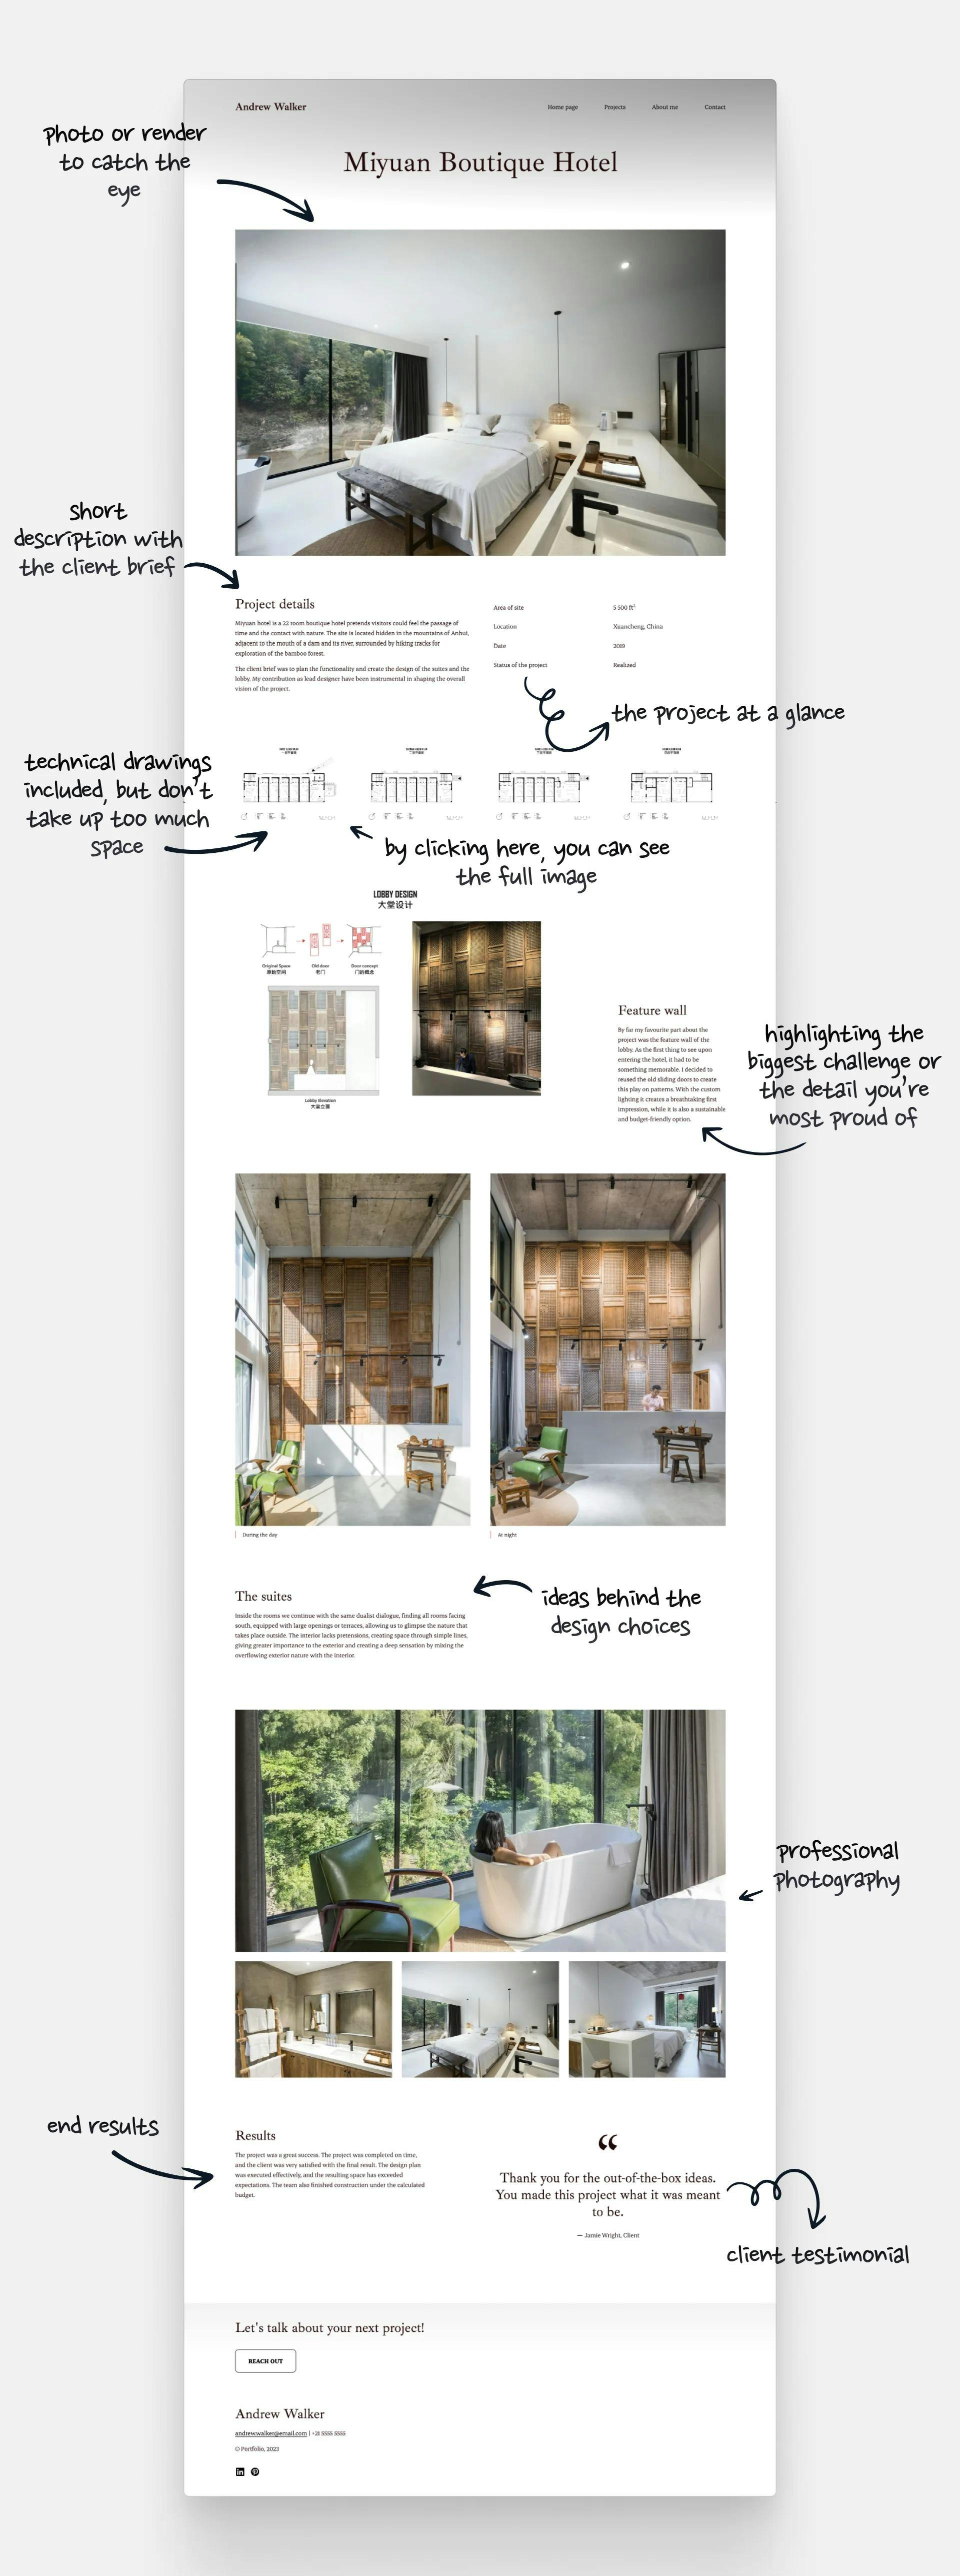 A rolling screenshot of an interior design project example page of a boutique hotel, arrows highlighting the most important parts of the portfolio